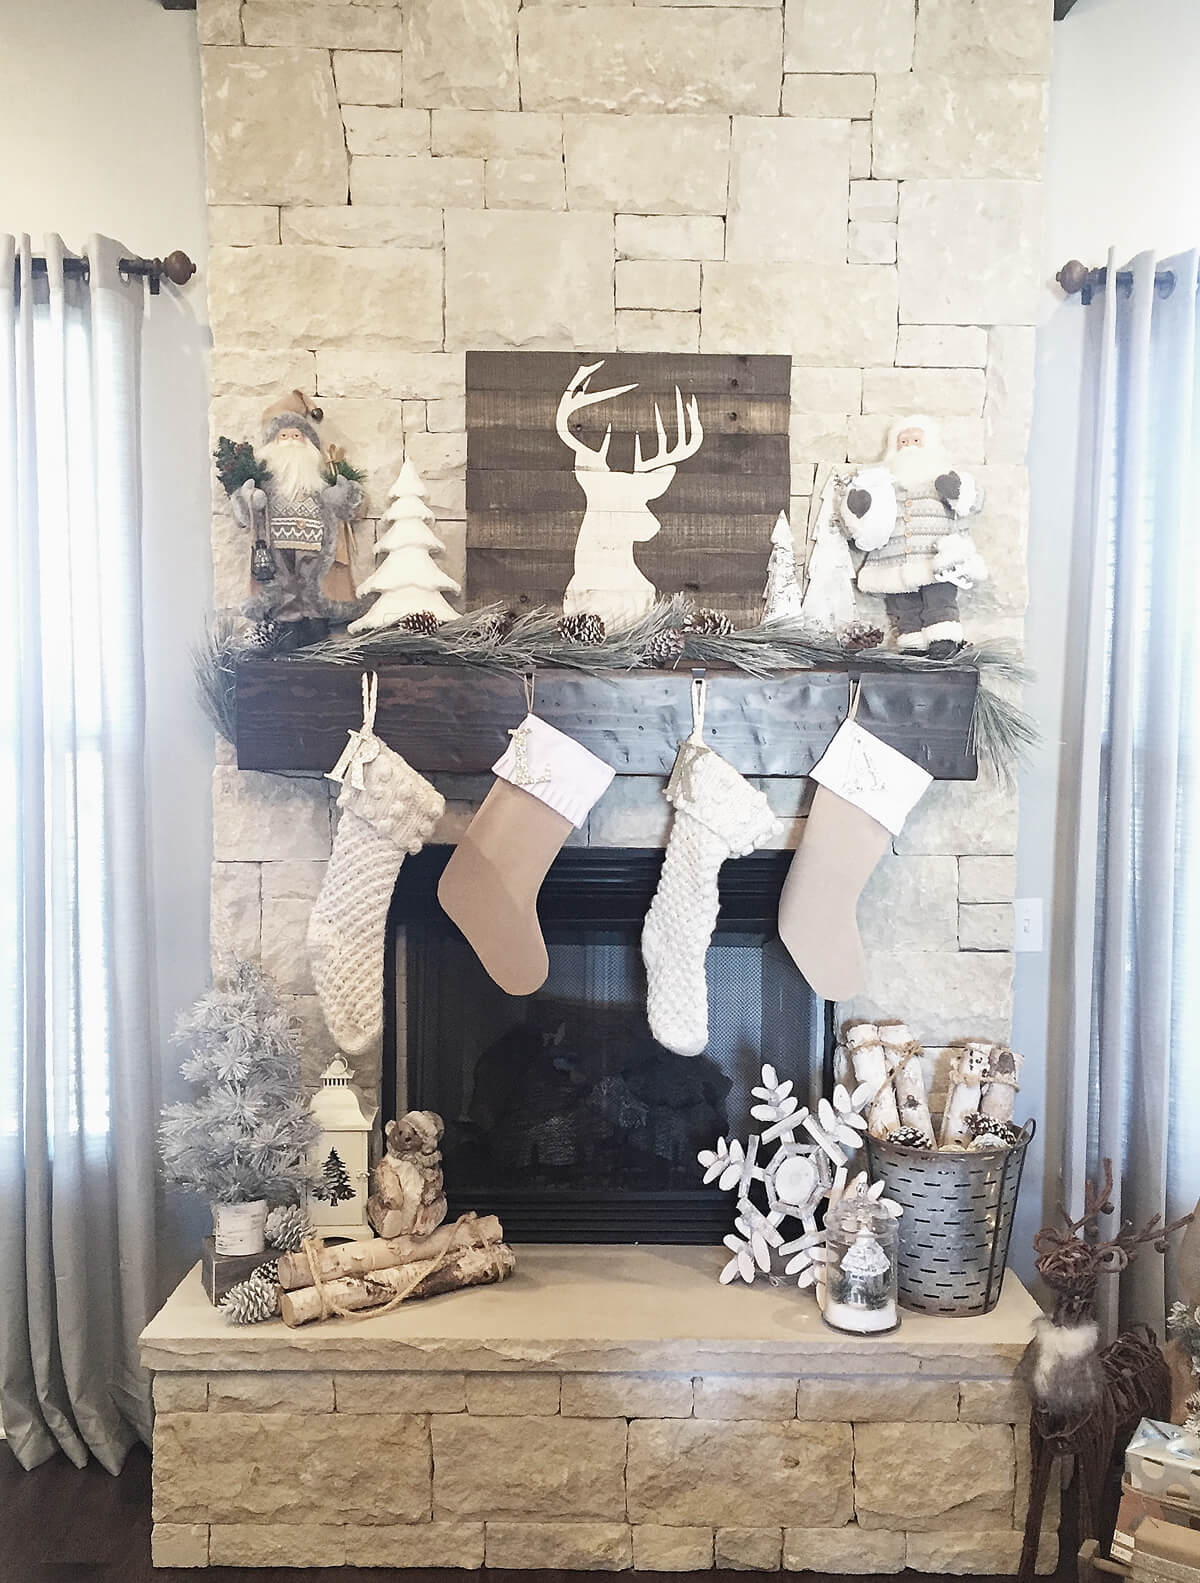 Mismatched Neutrals Create a Rustic Display